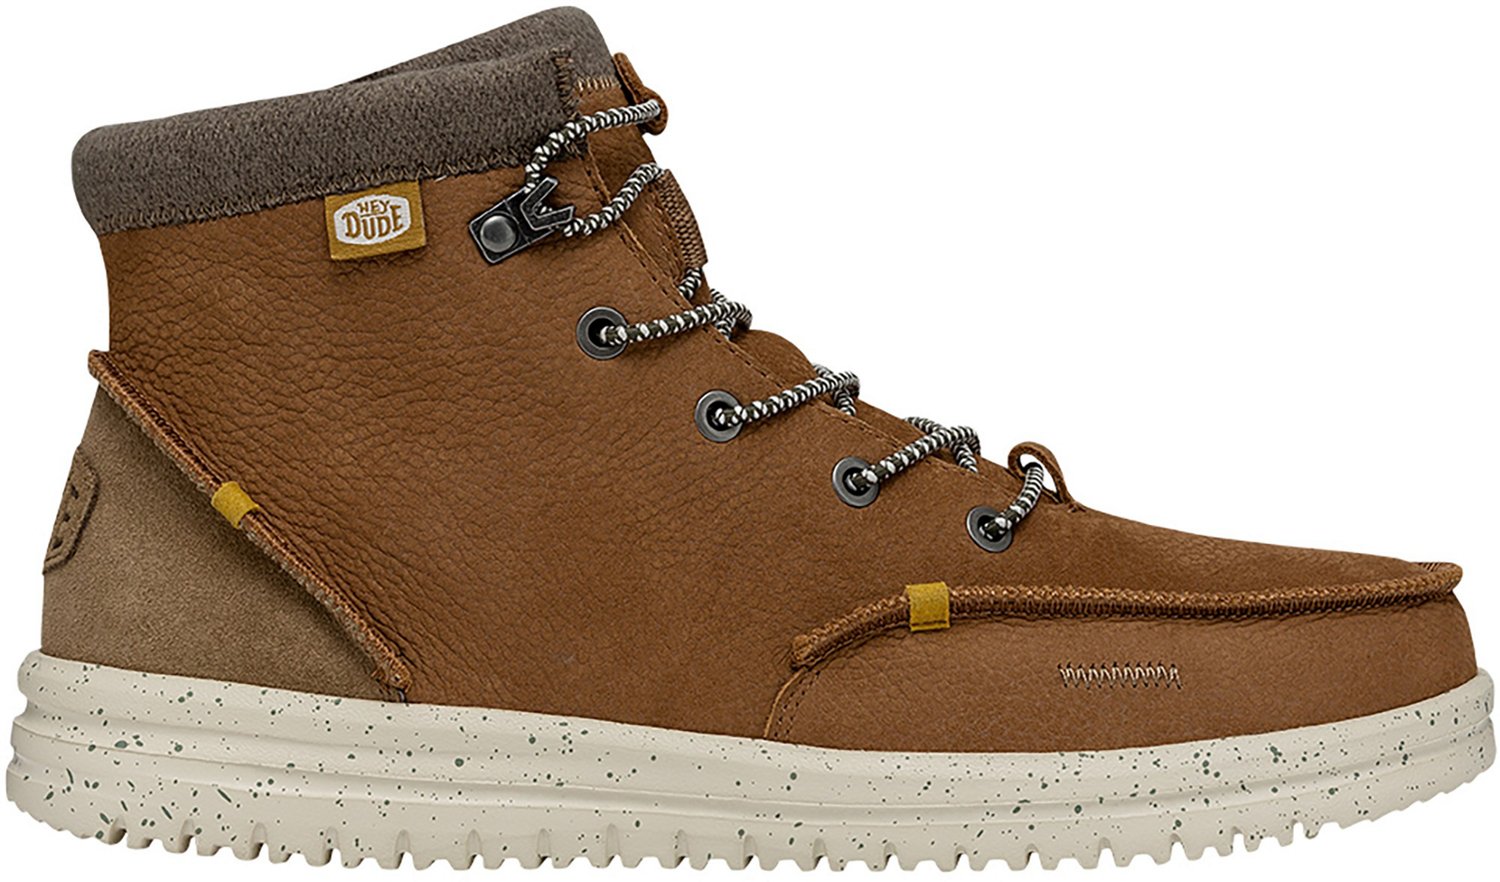 HEYDUDE Men's Bradley Boots | Free Shipping at Academy